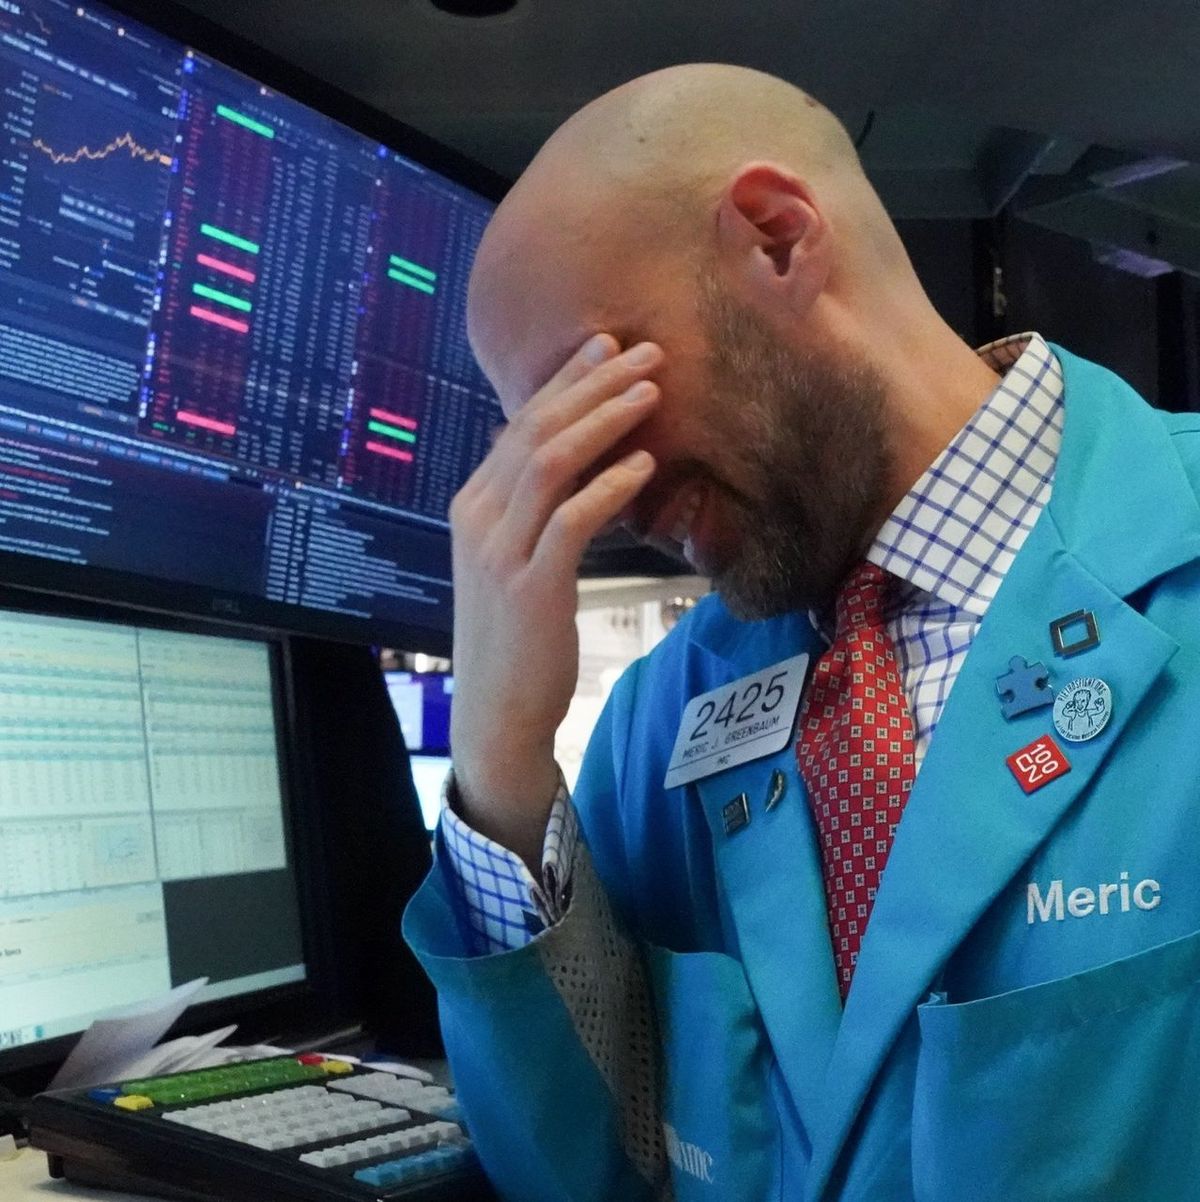 Markets plunge as virus scare and oil cuts scare investors